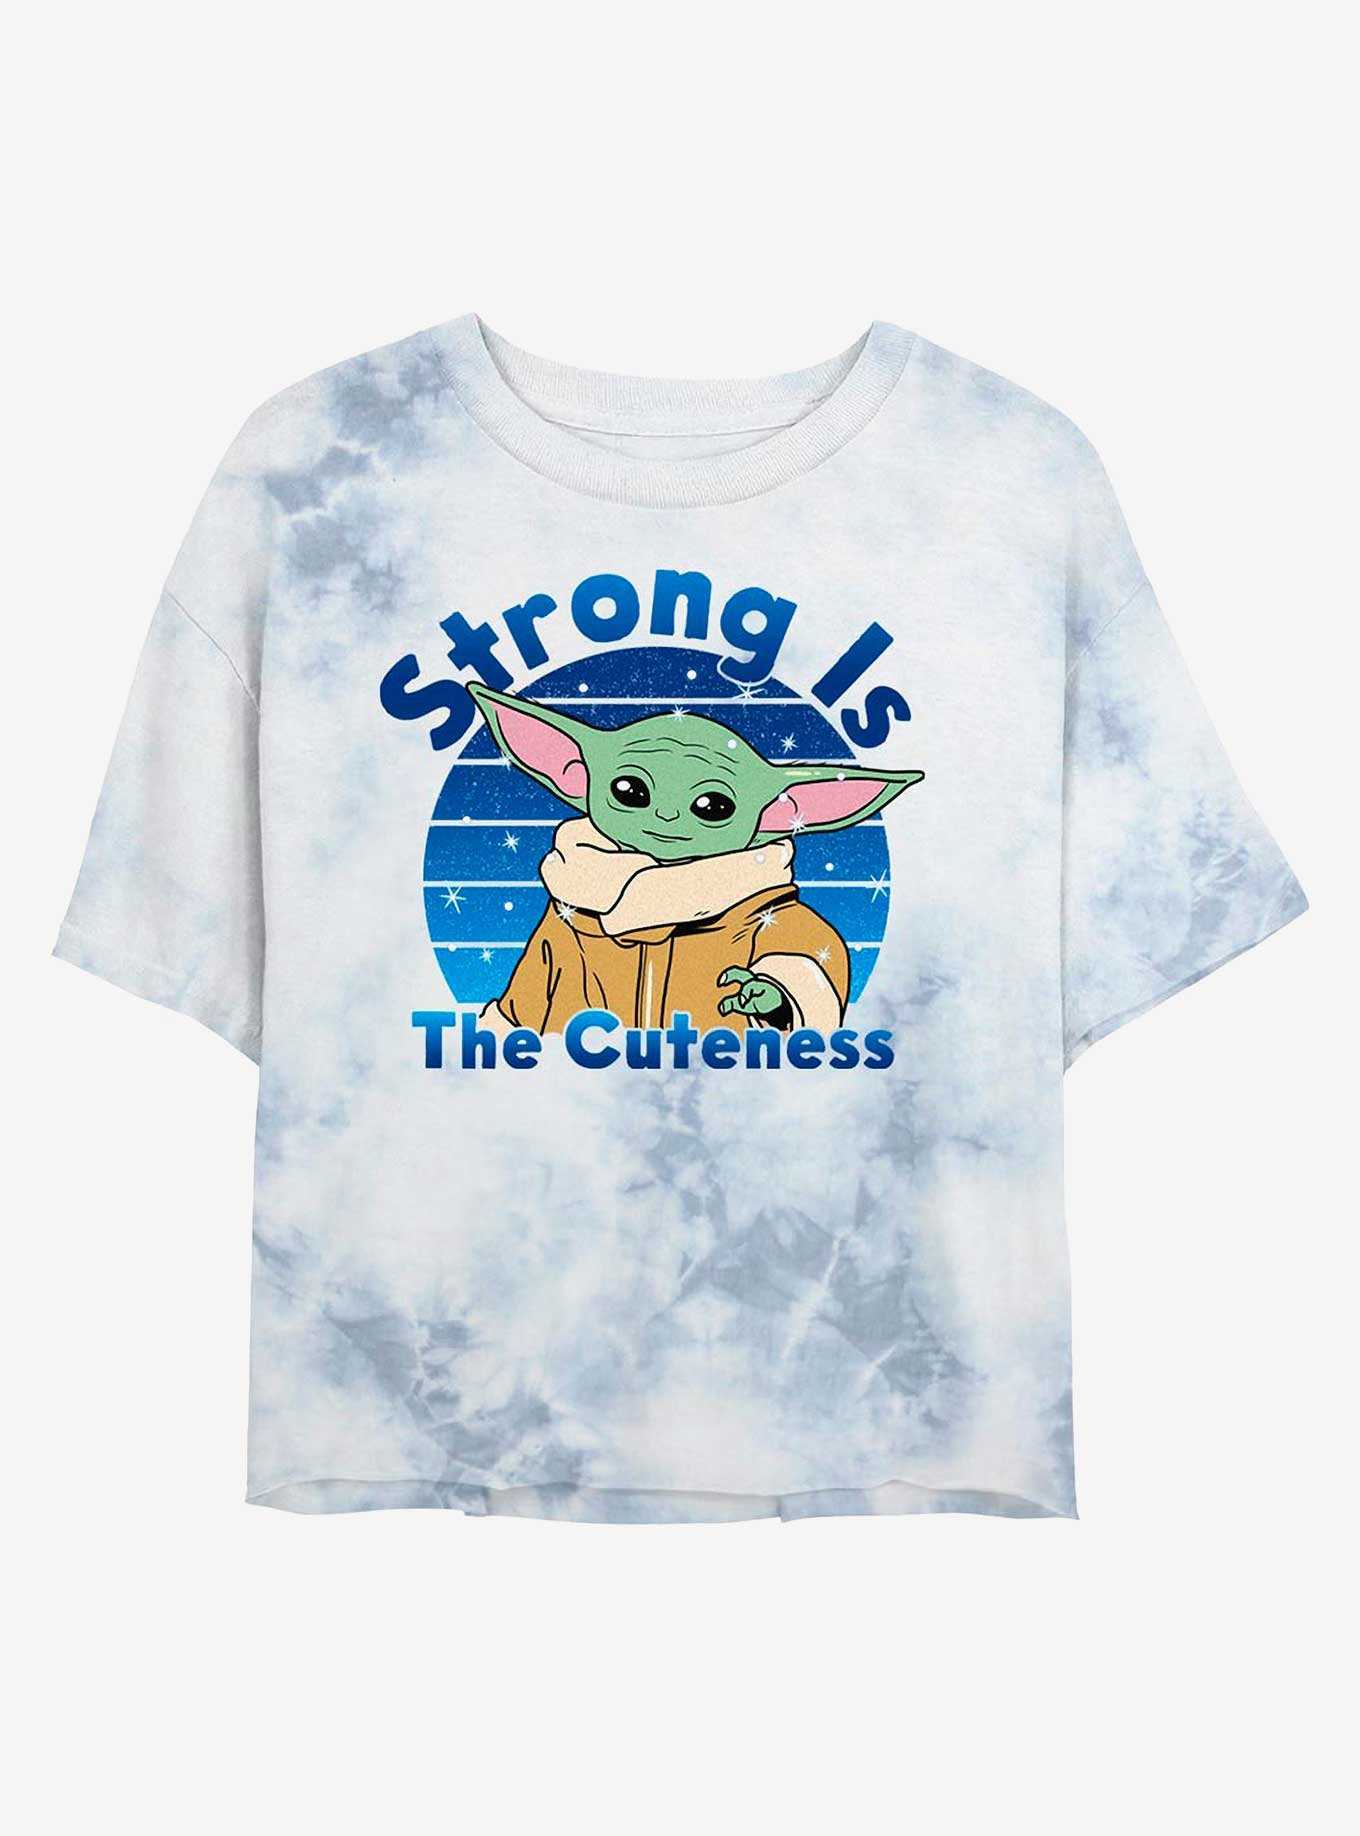 Star Wars The Mandalorian The Child Strong Is The Cuteness Tie-Dye Womens Crop T-Shirt, , hi-res